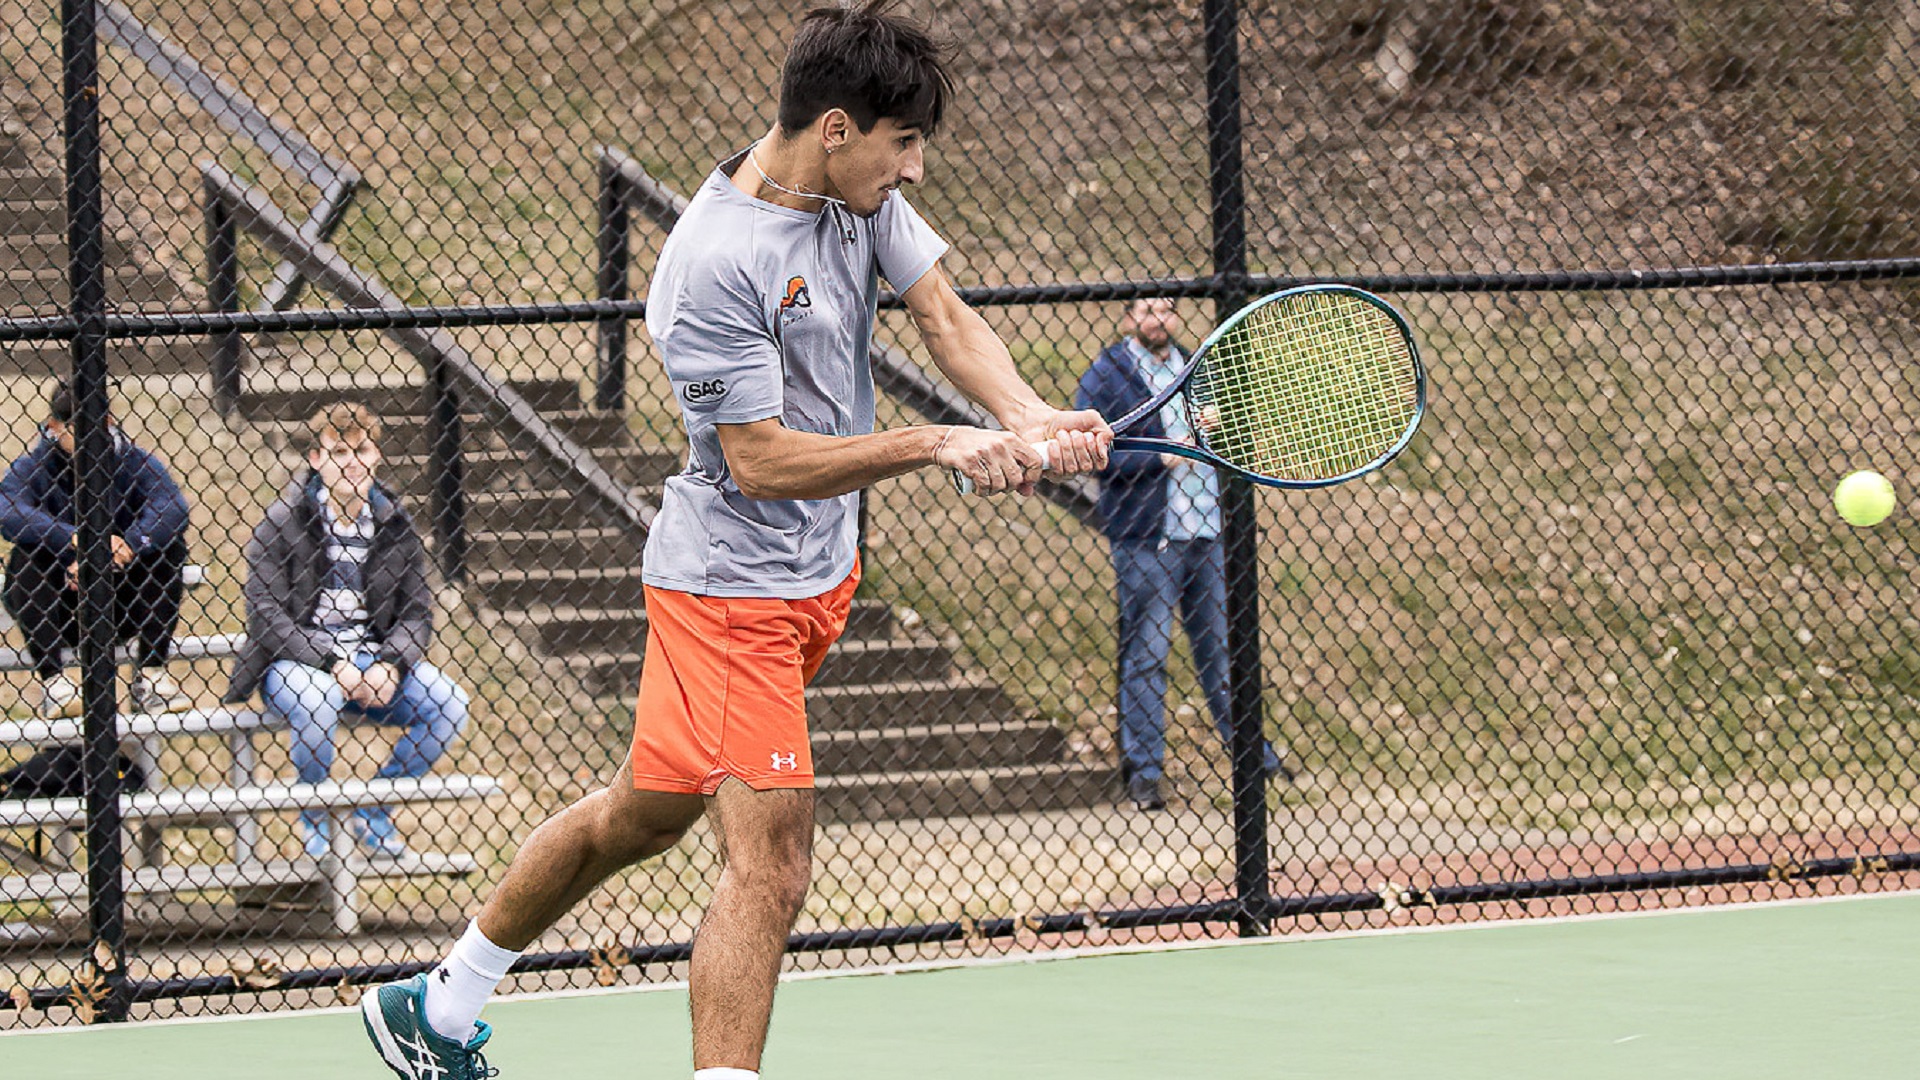 Pioneers defeat Mars Hill 6-1 to open SAC play